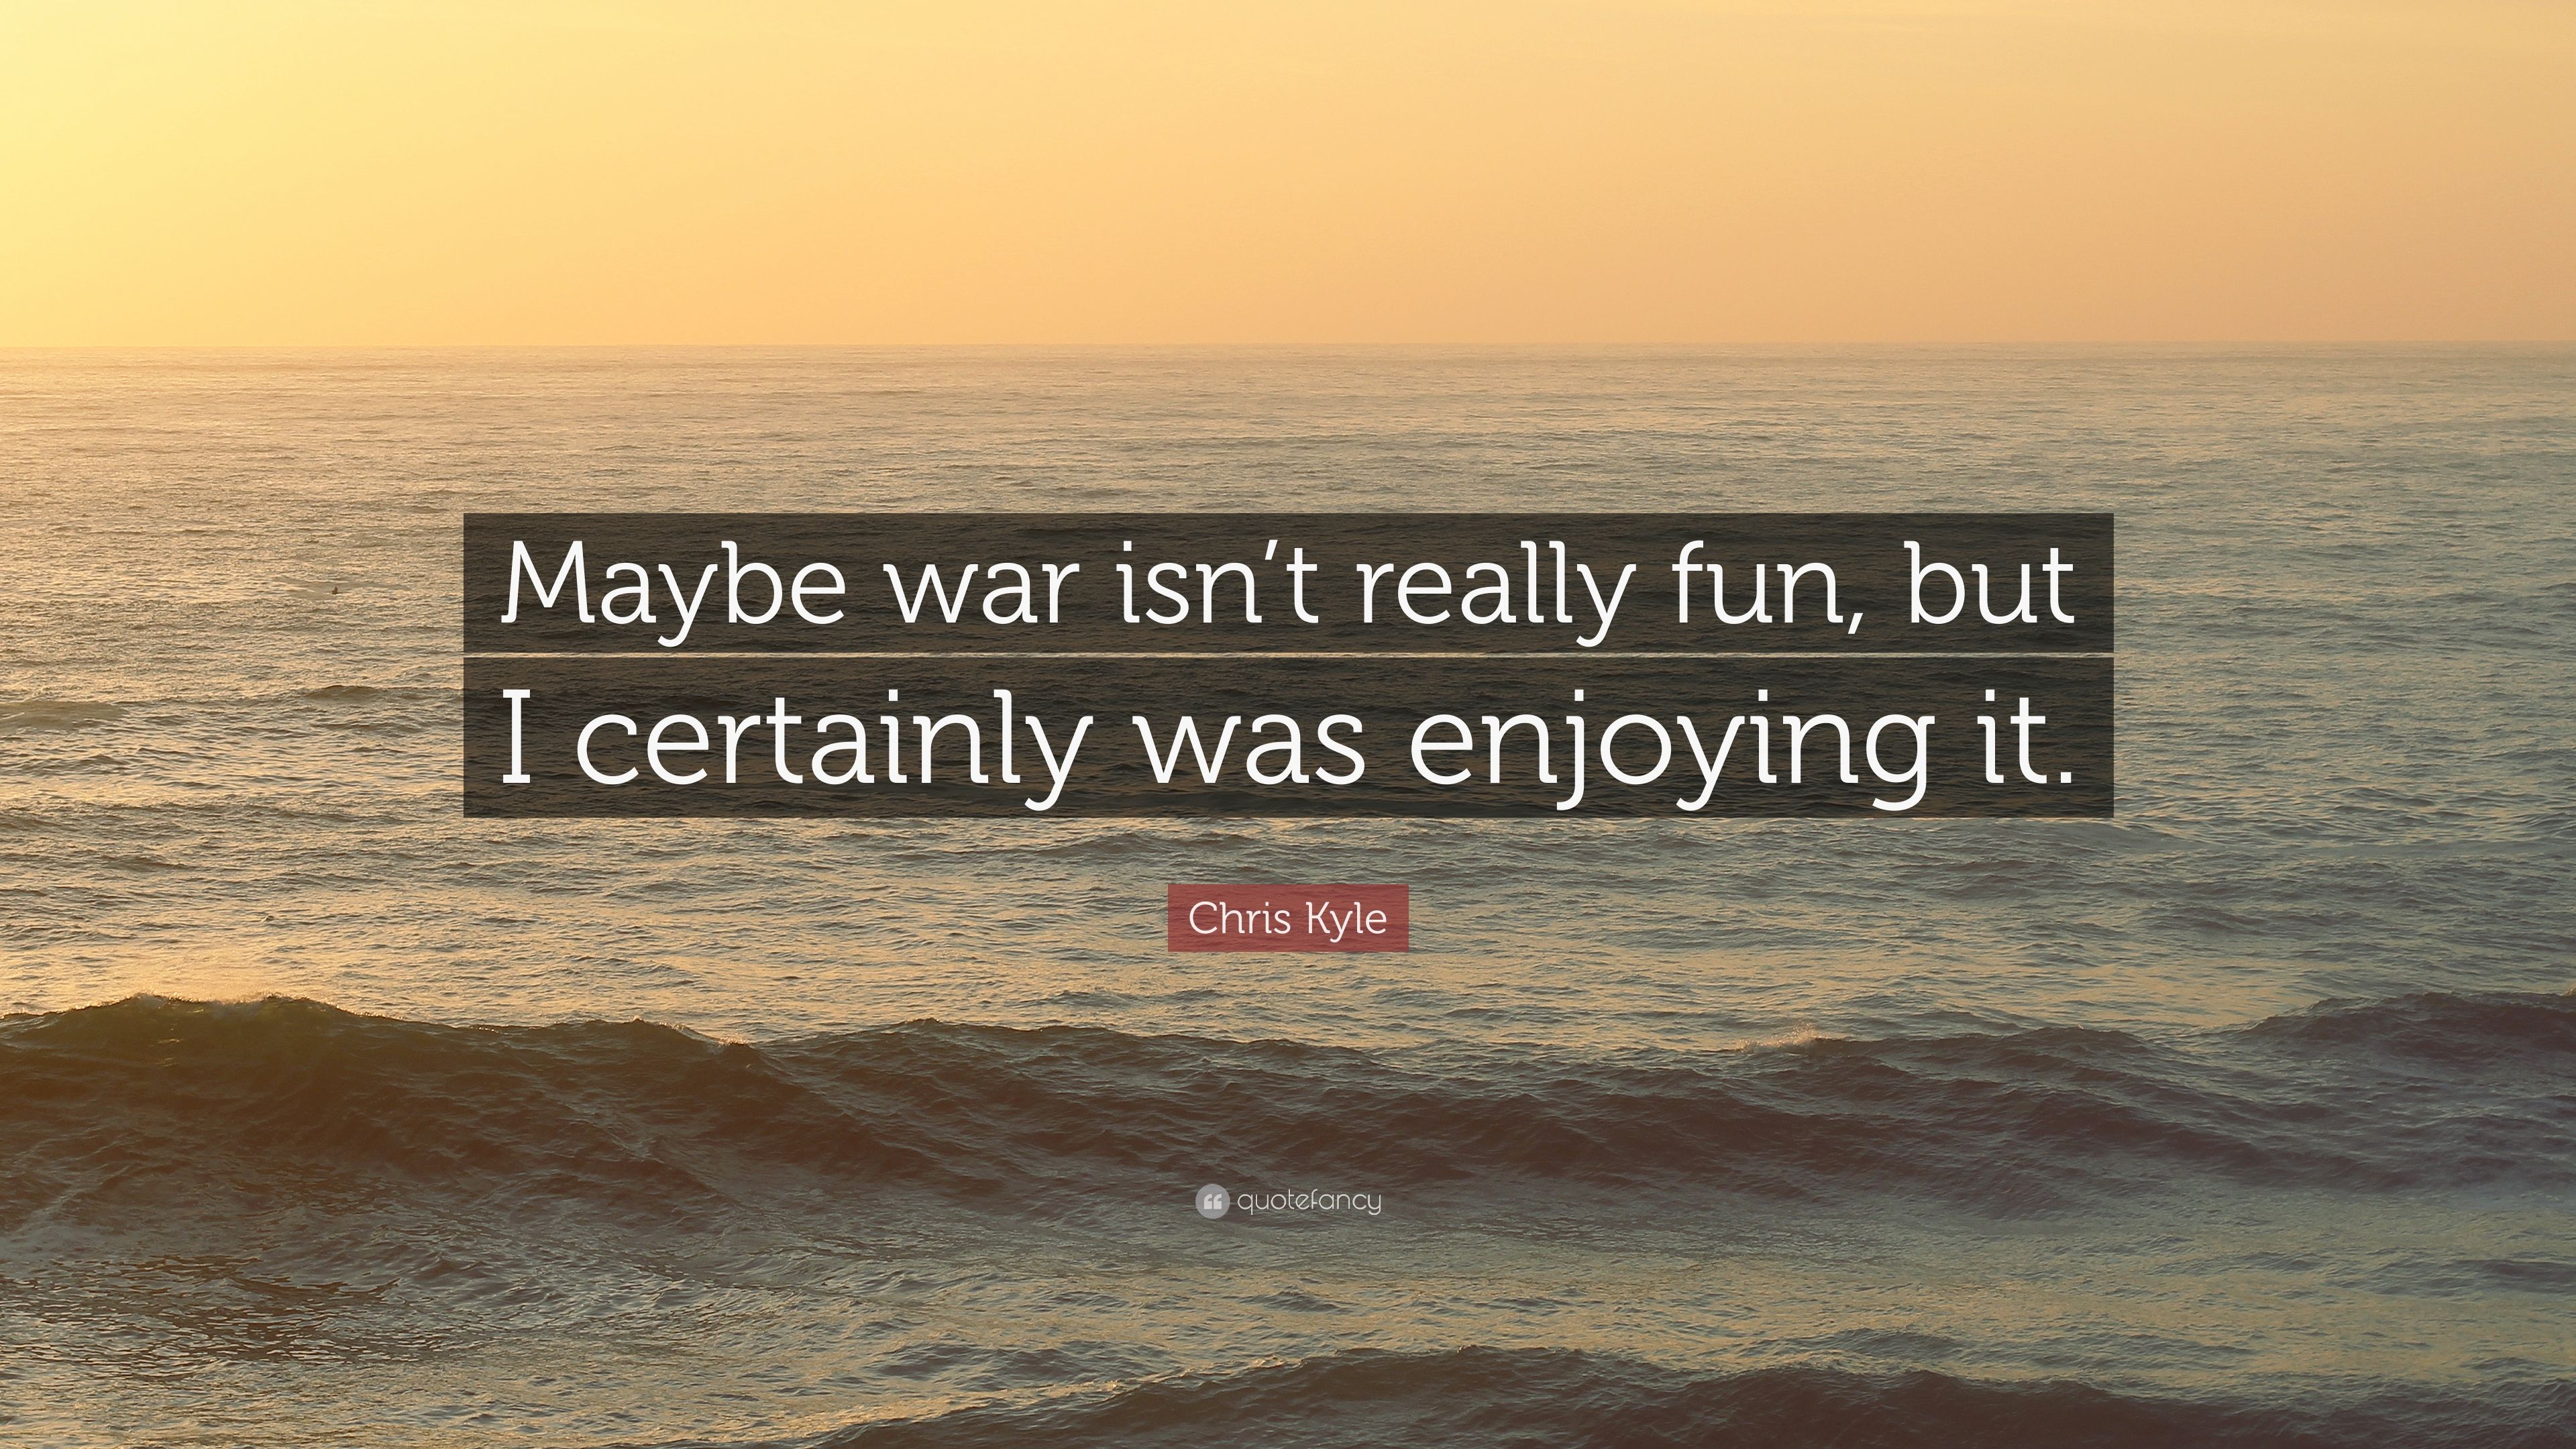 Chris Kyle Quote: “Maybe war isn't really fun, but I certainly was